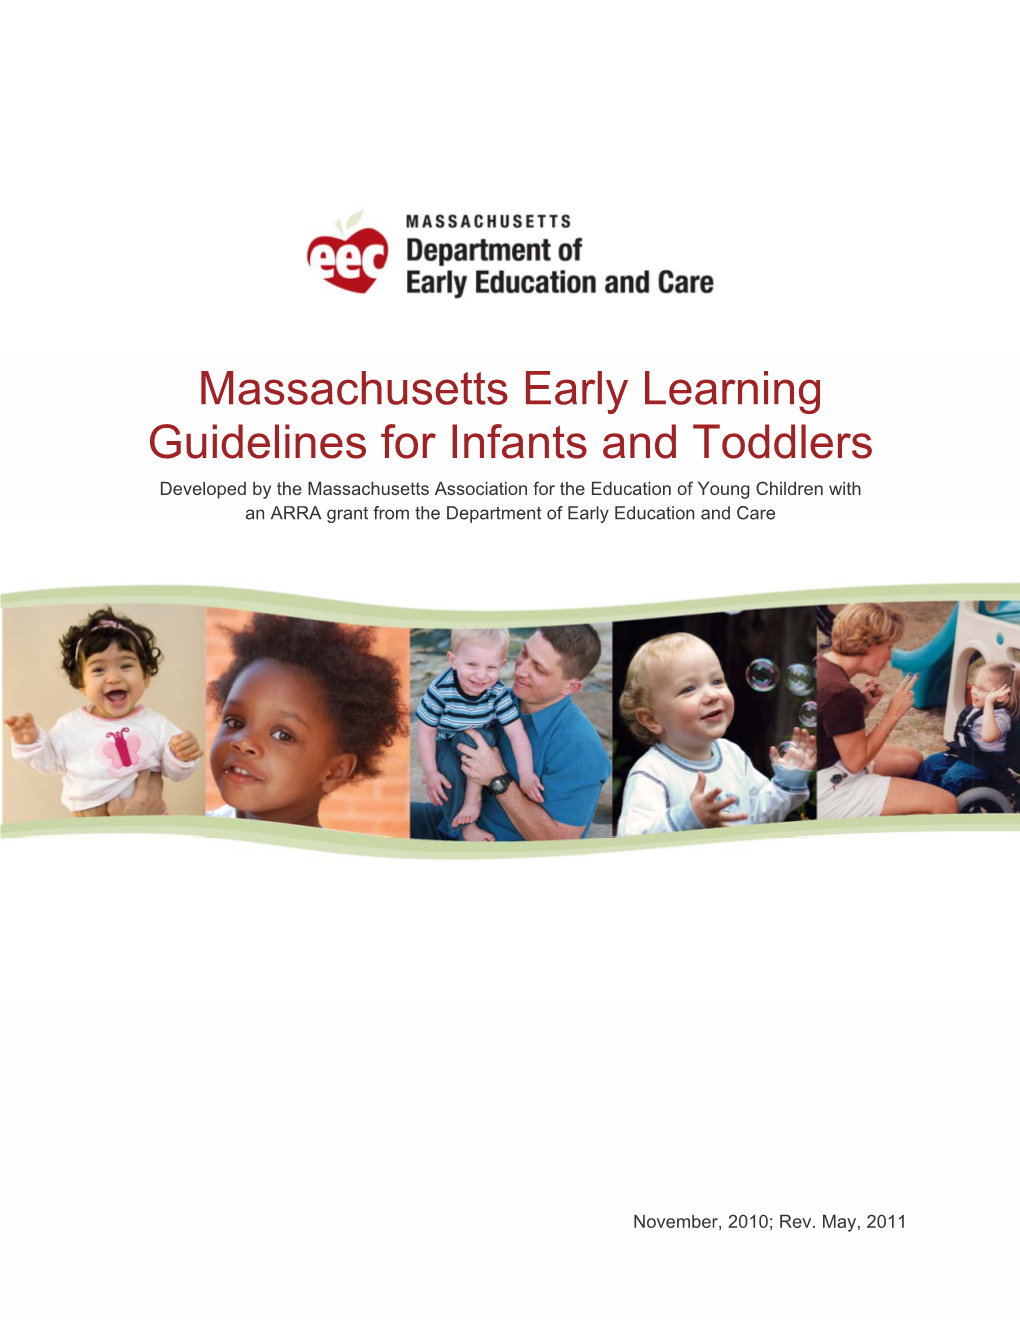 Massachusetts Early Learning Guidelines for Infants and Toddlers